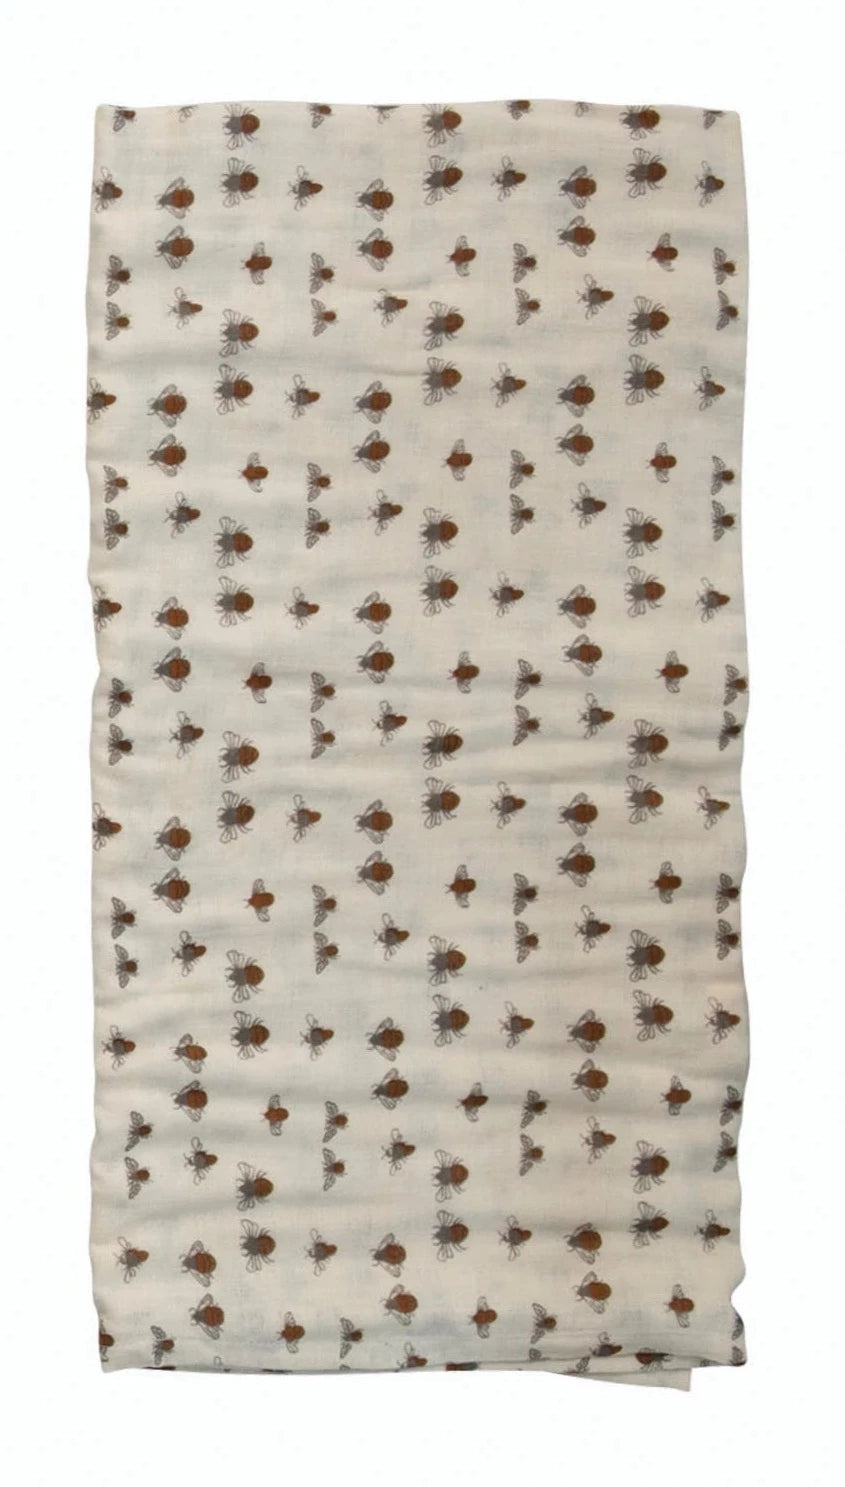 Natural Bees Cotton Swaddle